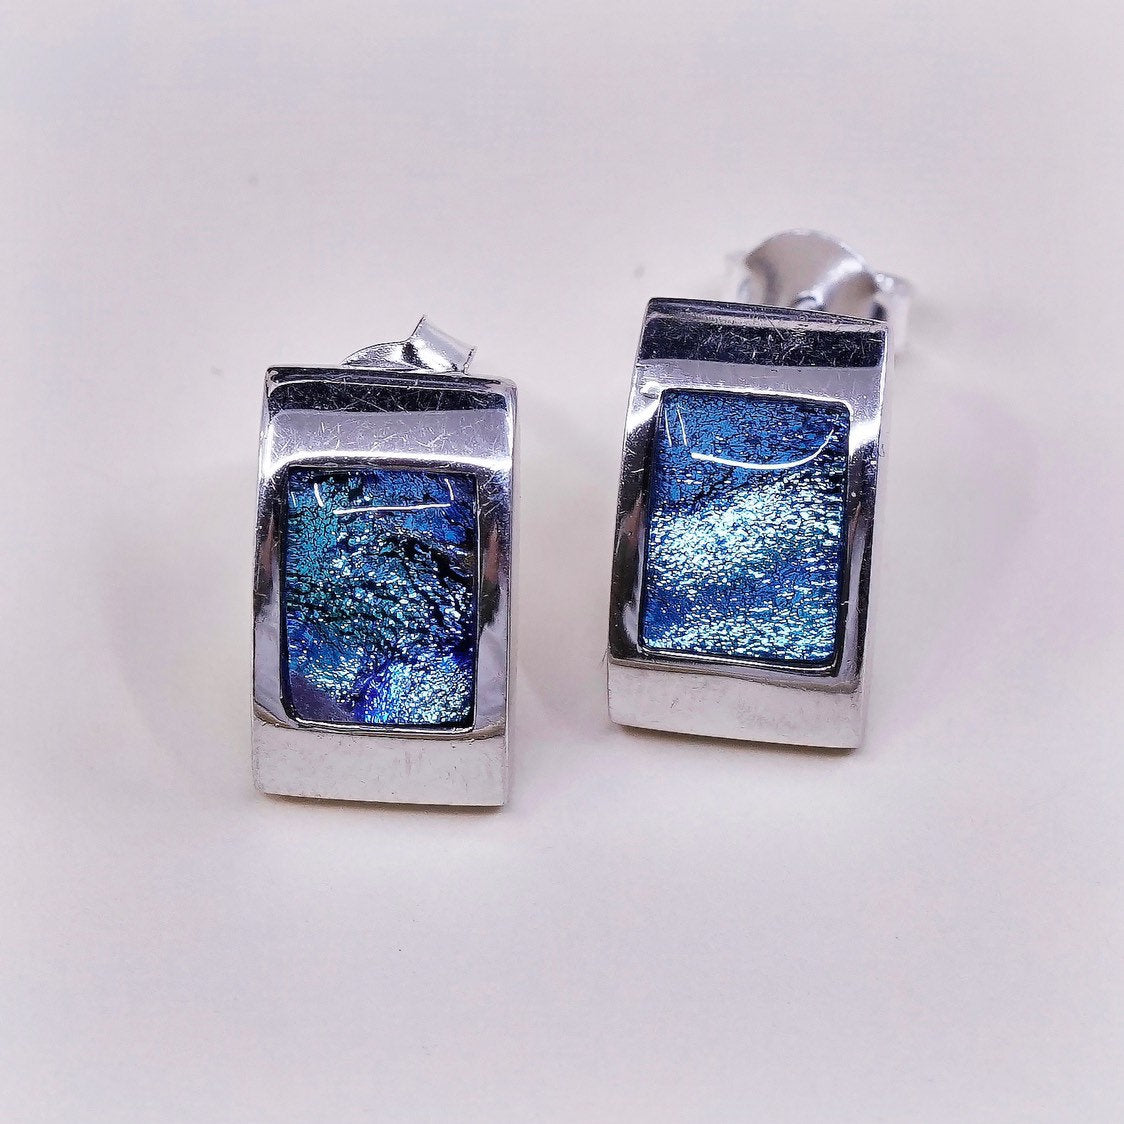 sarah's hope jewelry, sterling 925 silver earrings w/ Foiled glass